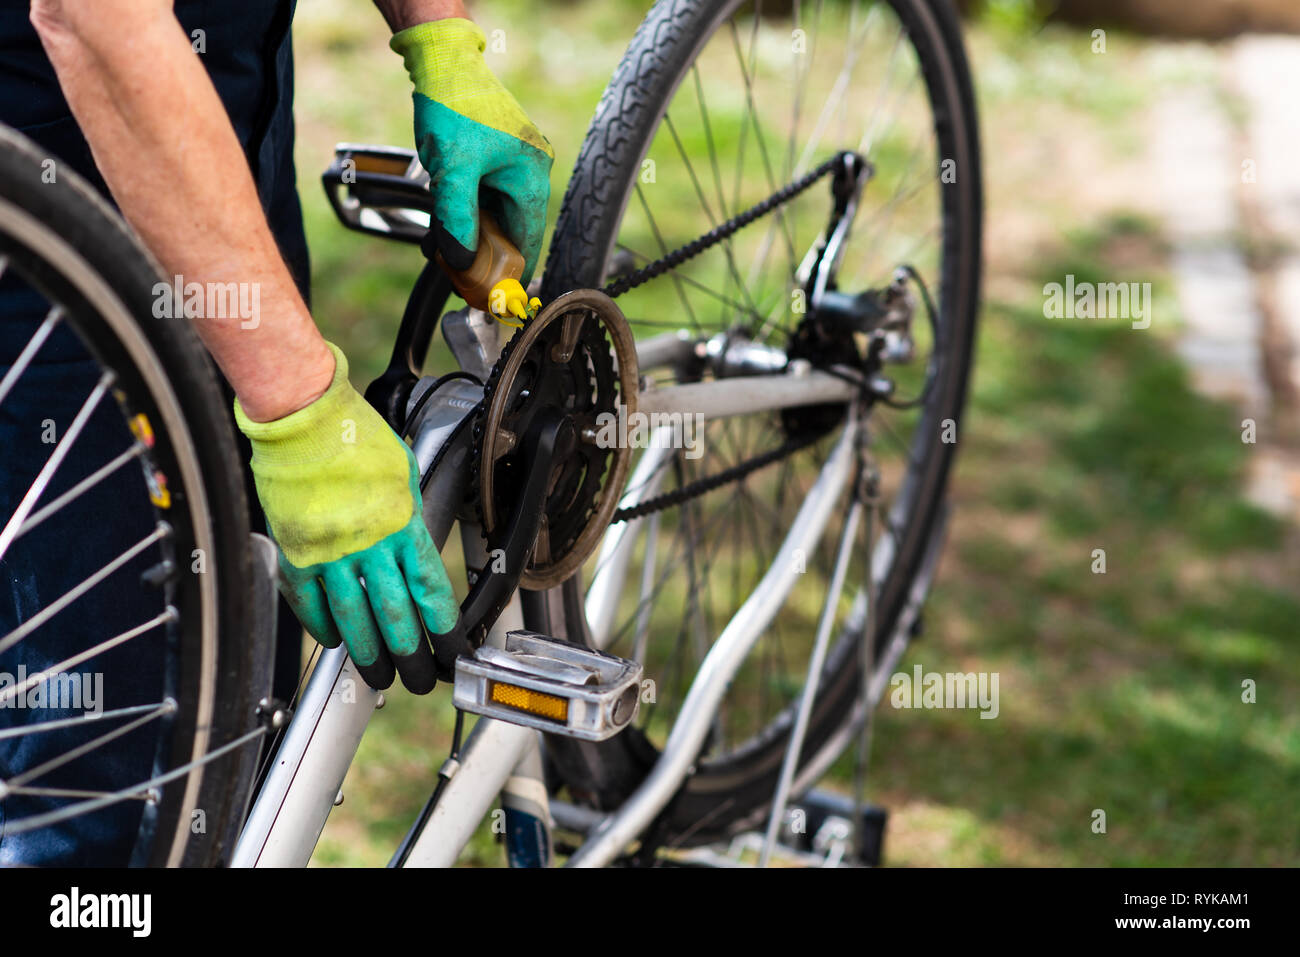 Man lubricating bicycle chain and maintaining for the new season Stock Photo